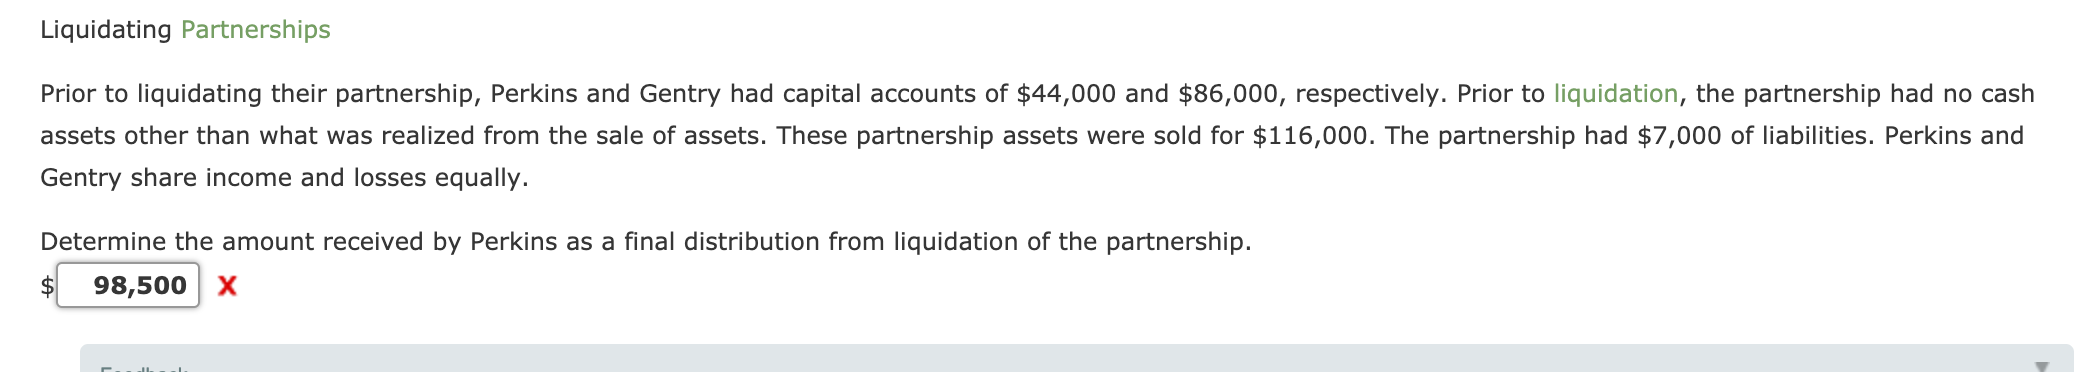 Prior to liquidating their partnership, Perkins and Gentry had capital accounts of $44,000 and $86,000, respectively. Prior to liquidation, the partnership had no cash
assets other than what was realized from the sale of assets. These partnership assets were sold for $116,000. The partnership had $7,000 of liabilities. Perkins and
Gentry share income and losses equally.
Determine the amount received by Perkins as a final distribution from liquidation of the partnership.
